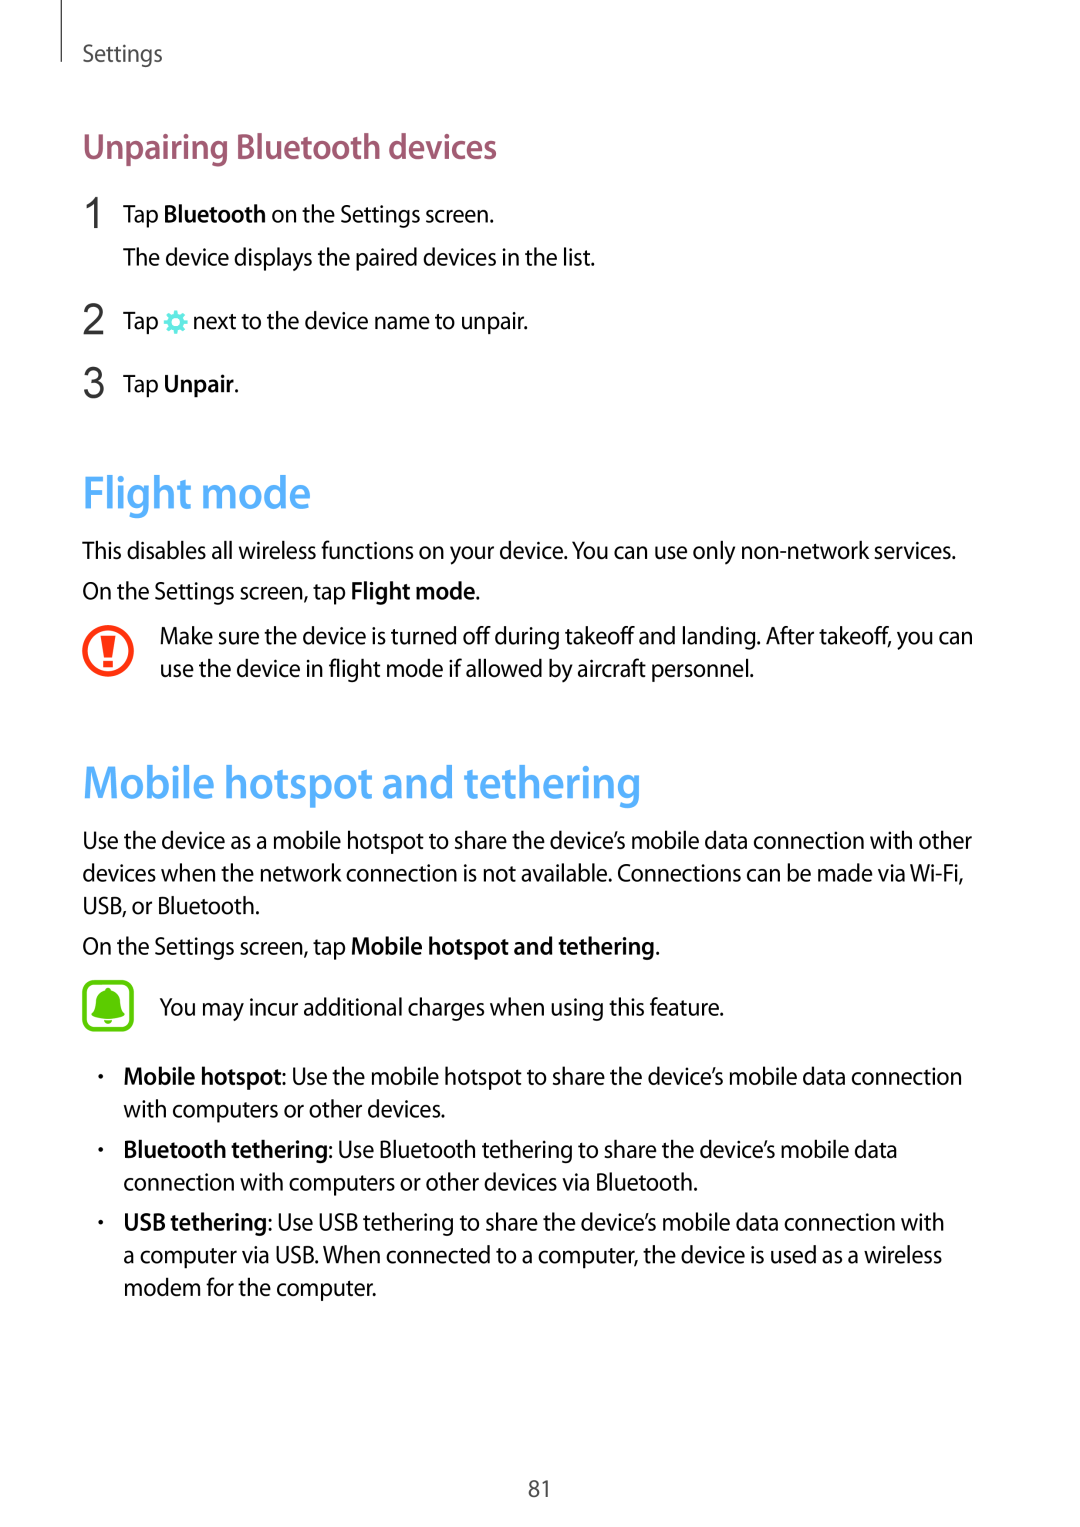 Samsung SM-T819NZWENEE manual Flight mode, Mobile hotspot and tethering, Unpairing Bluetooth devices, Tap Unpair, Settings 